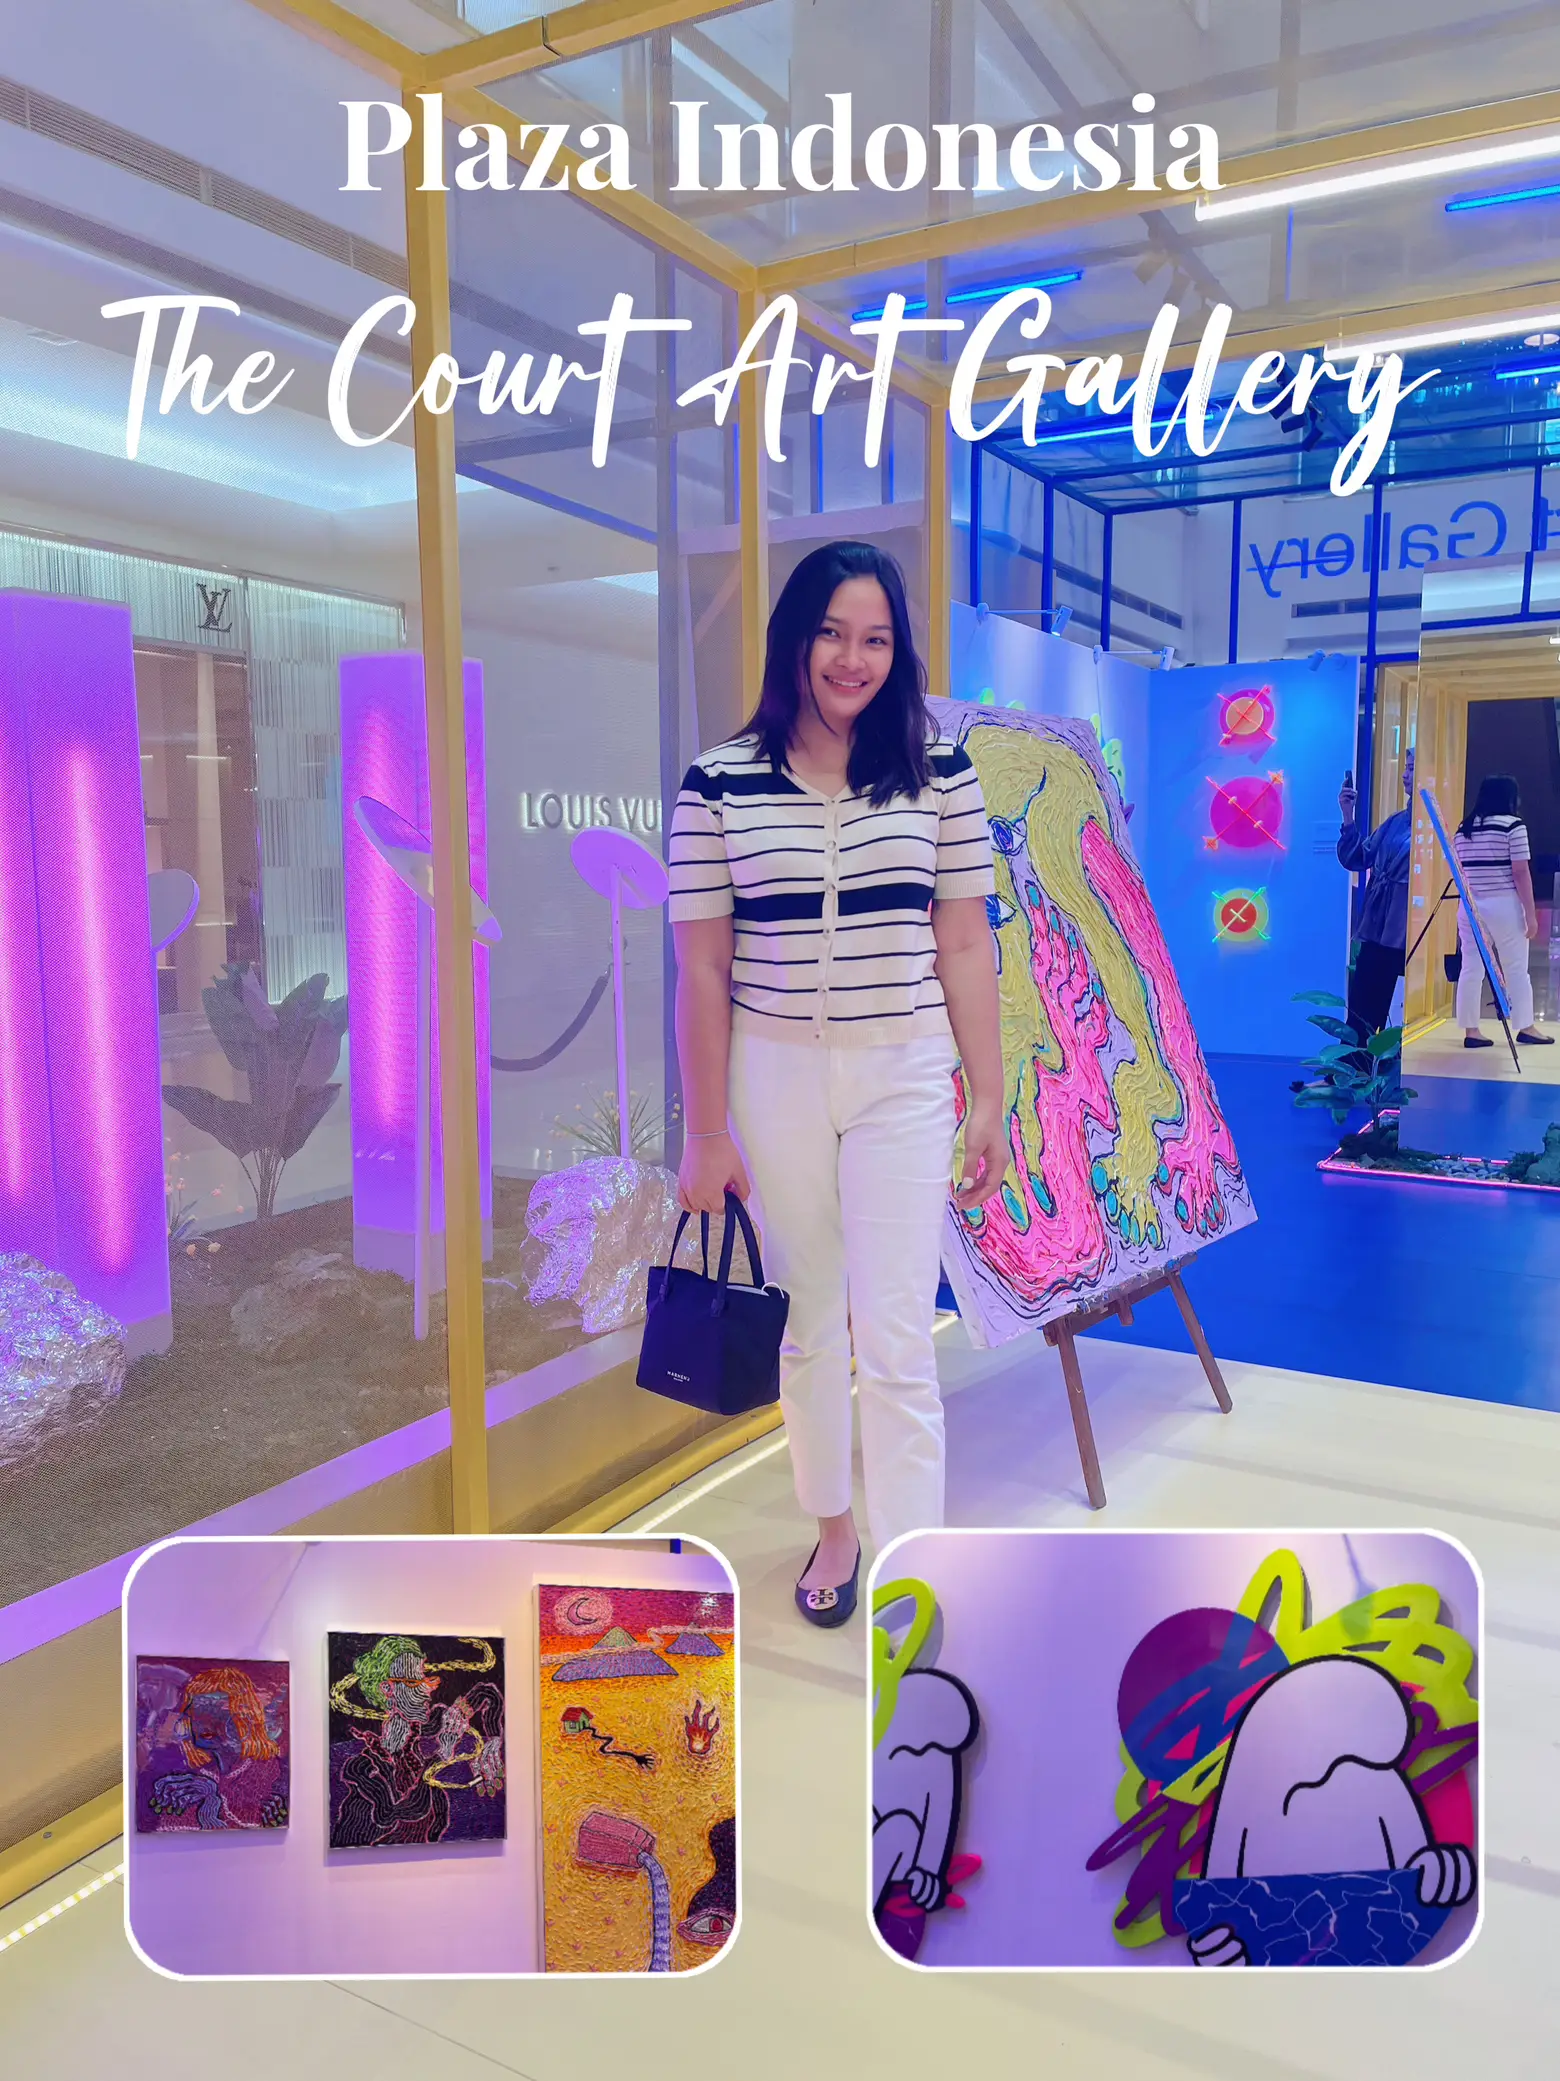 The Court Art Gallery Plaza Indonesia 🍋